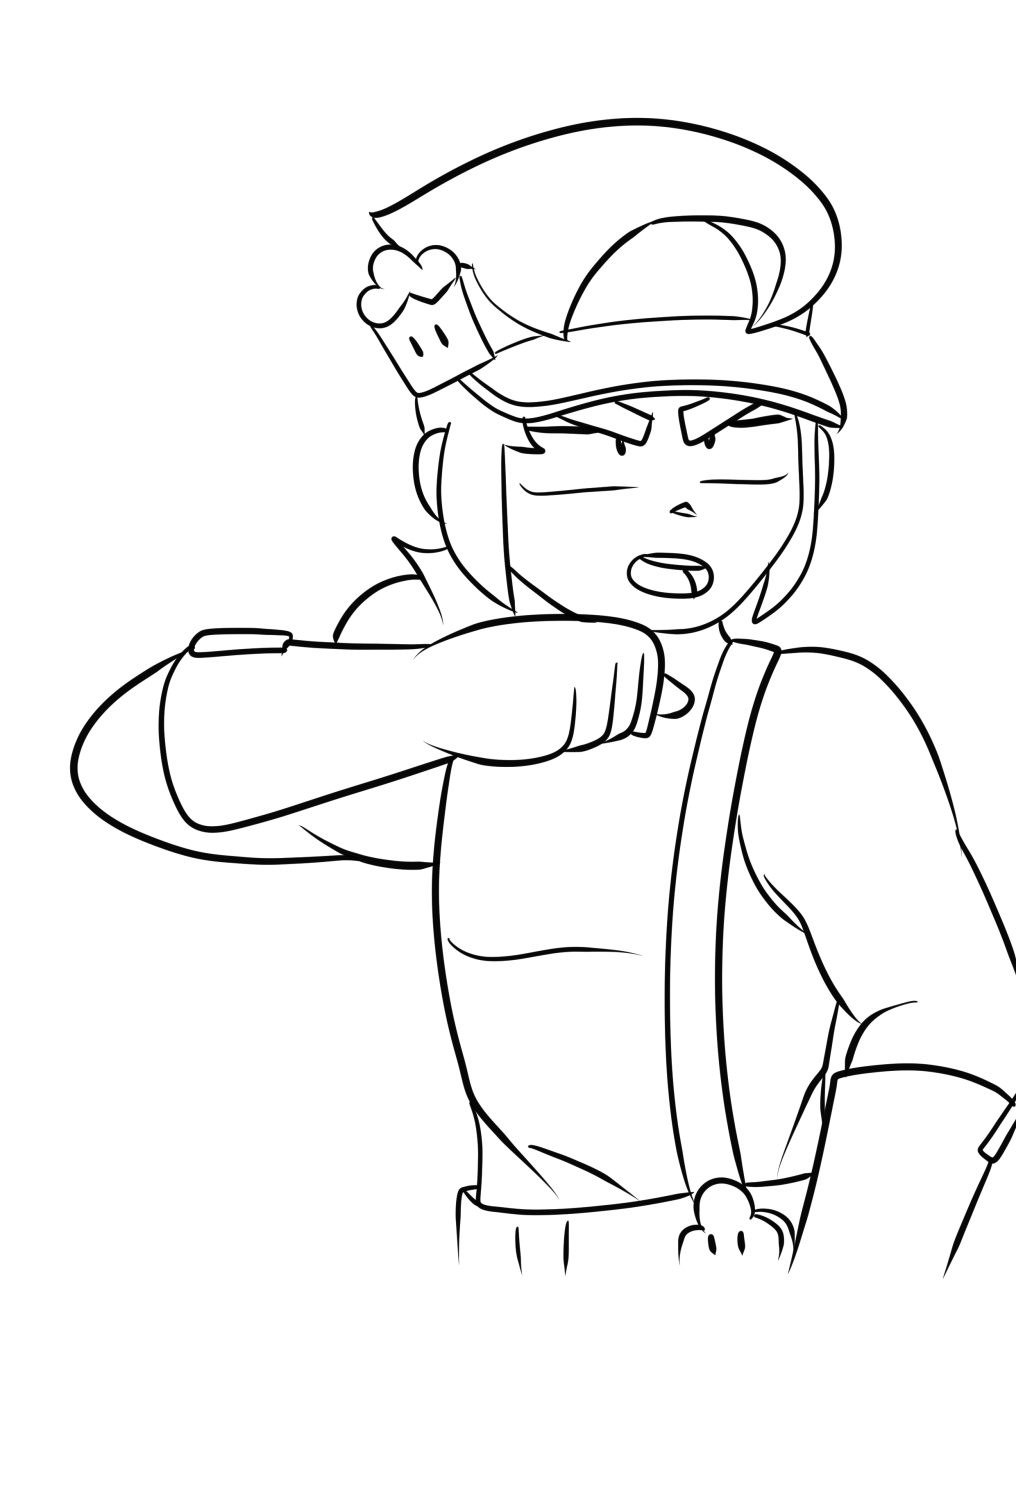 Fang 08 from Brawl Stars coloring page to print and coloring